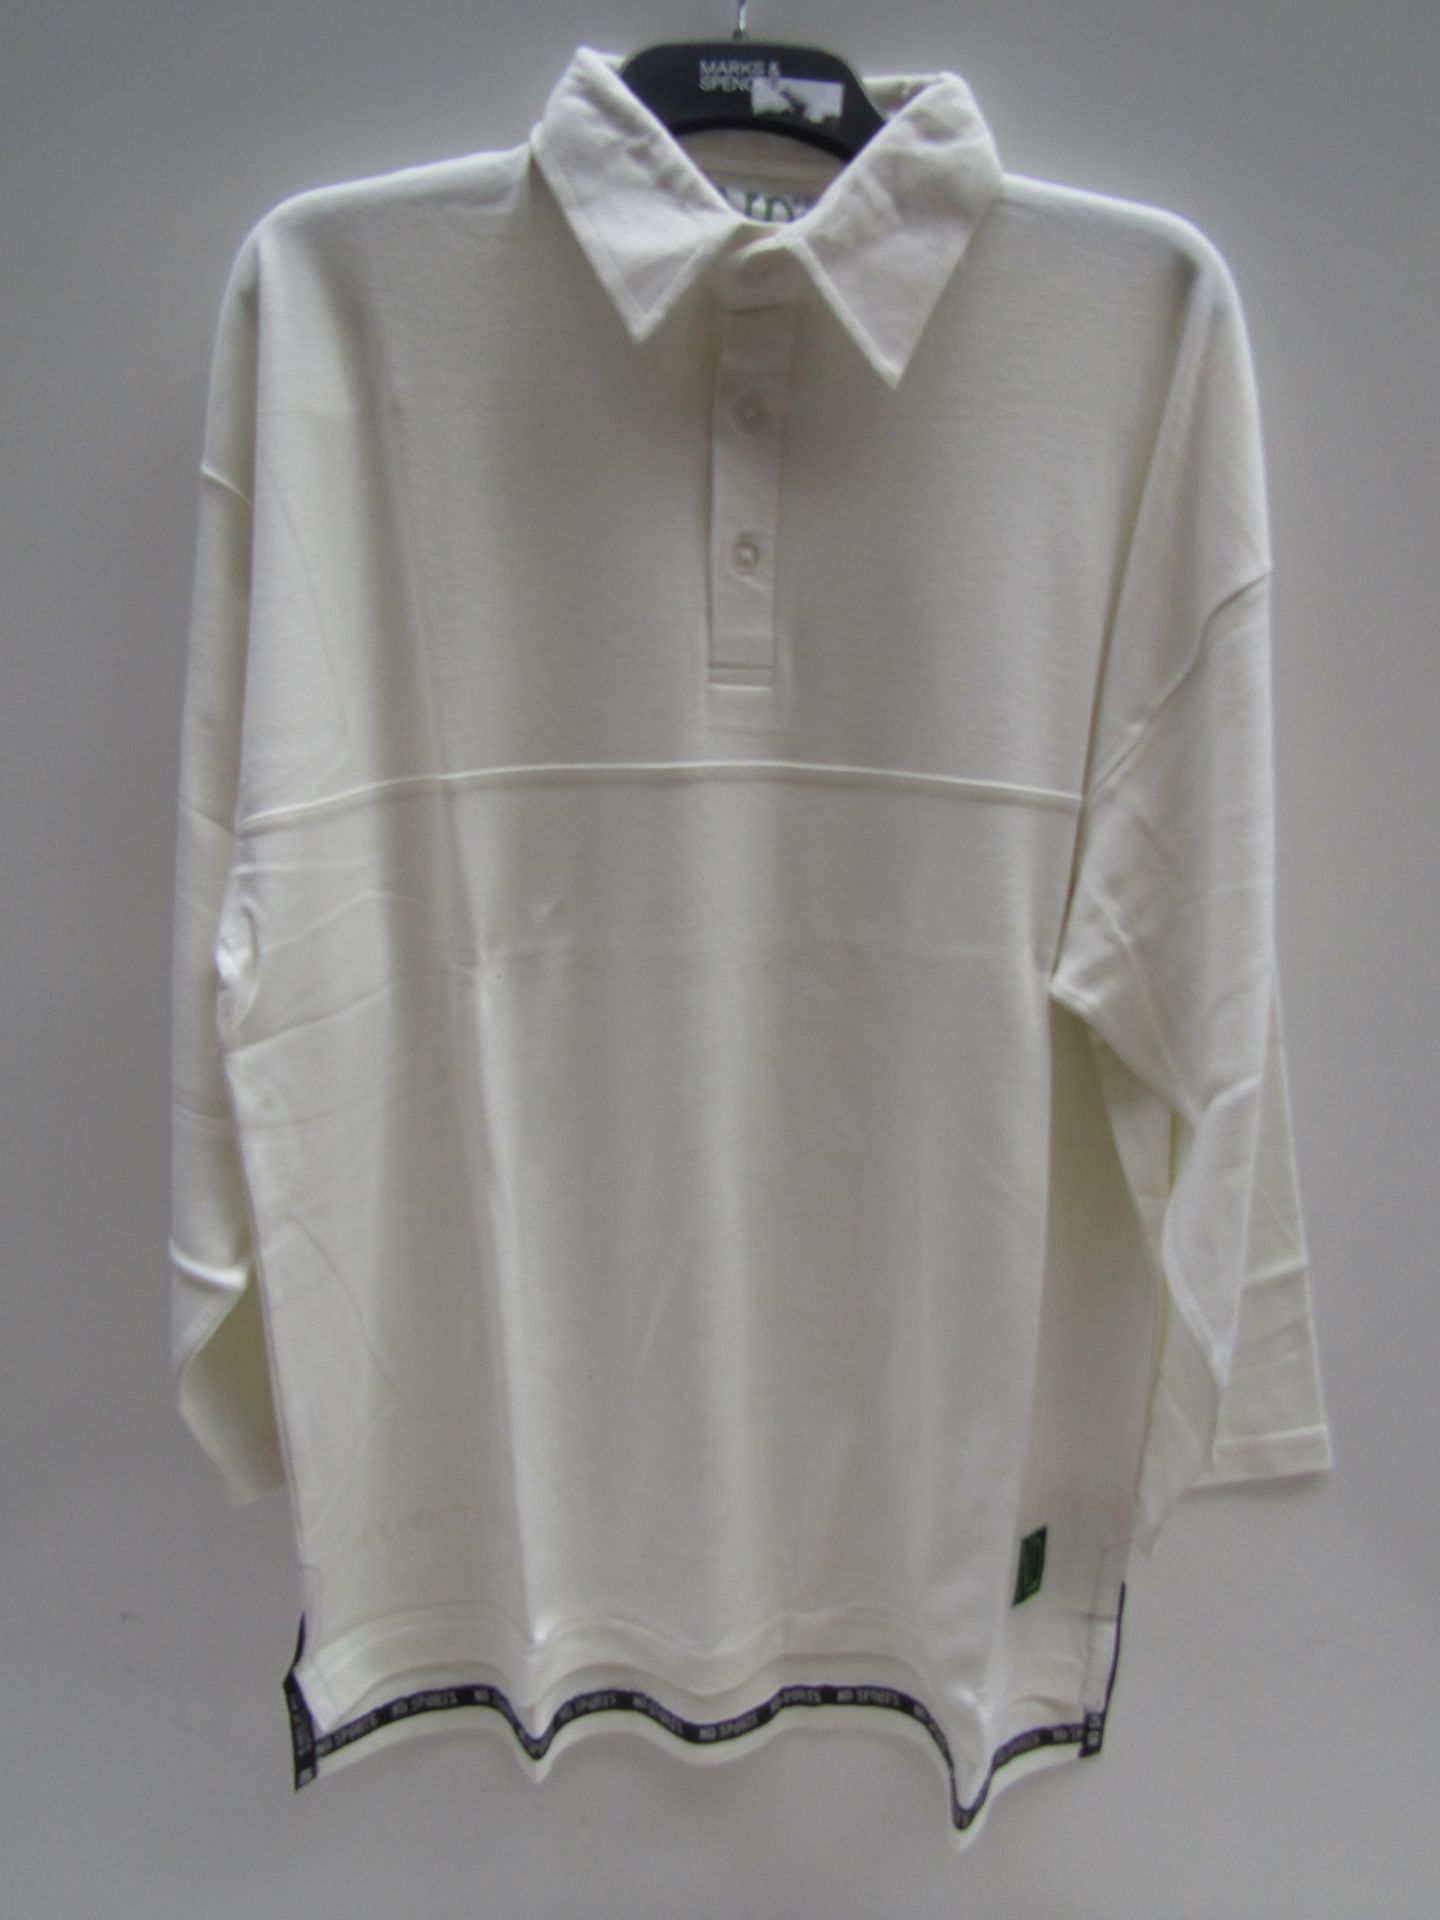 ND Sports plain white men's long sleeve polo top, size XL, new and packaged.